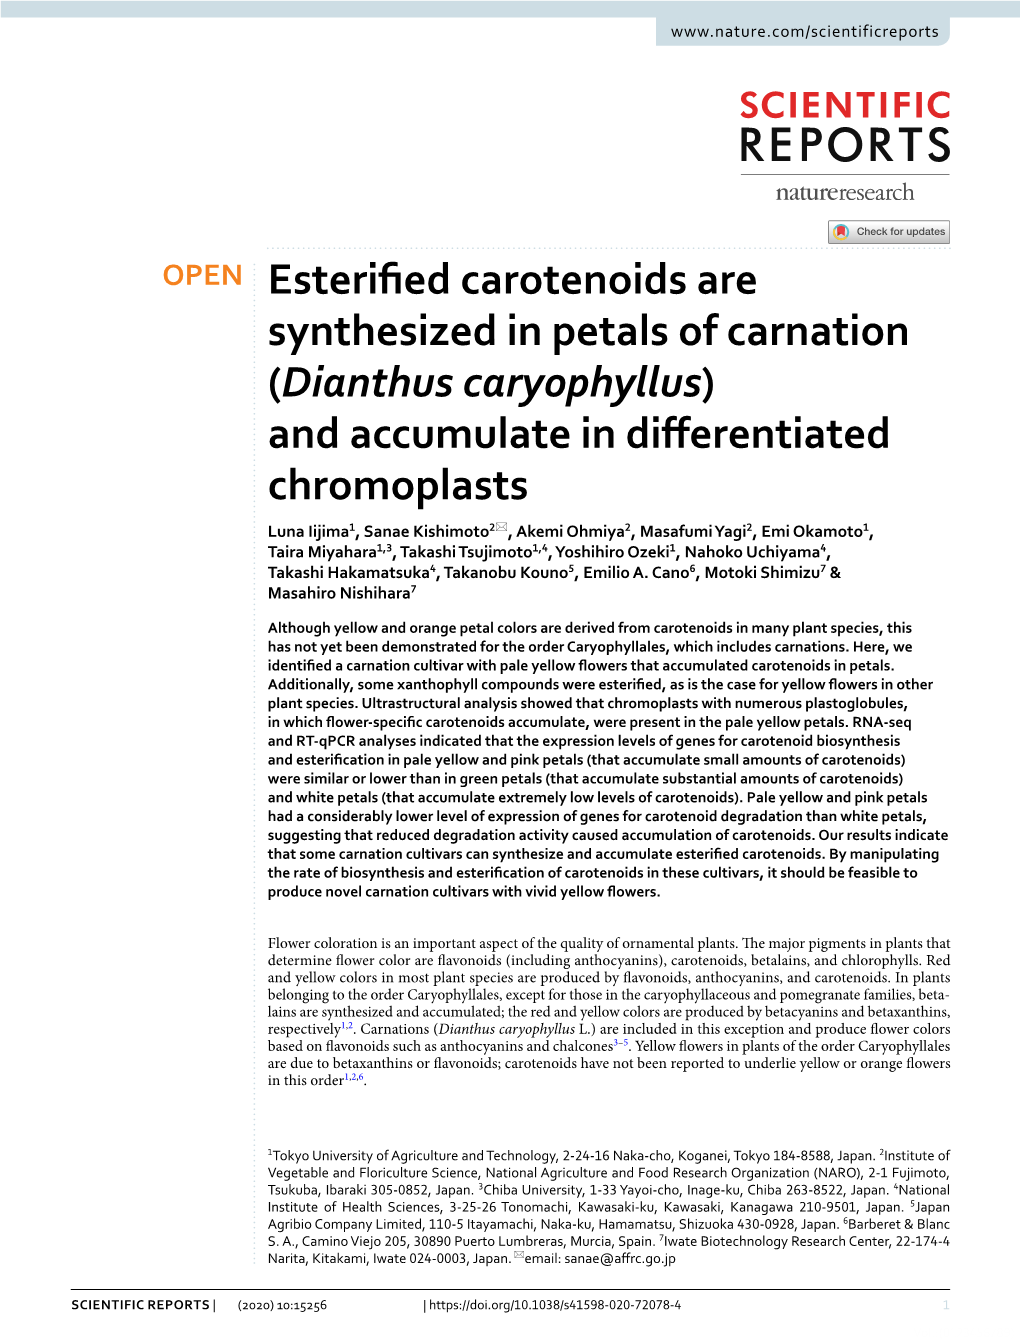 Esterified Carotenoids Are Synthesized in Petals of Carnation (Dianthus